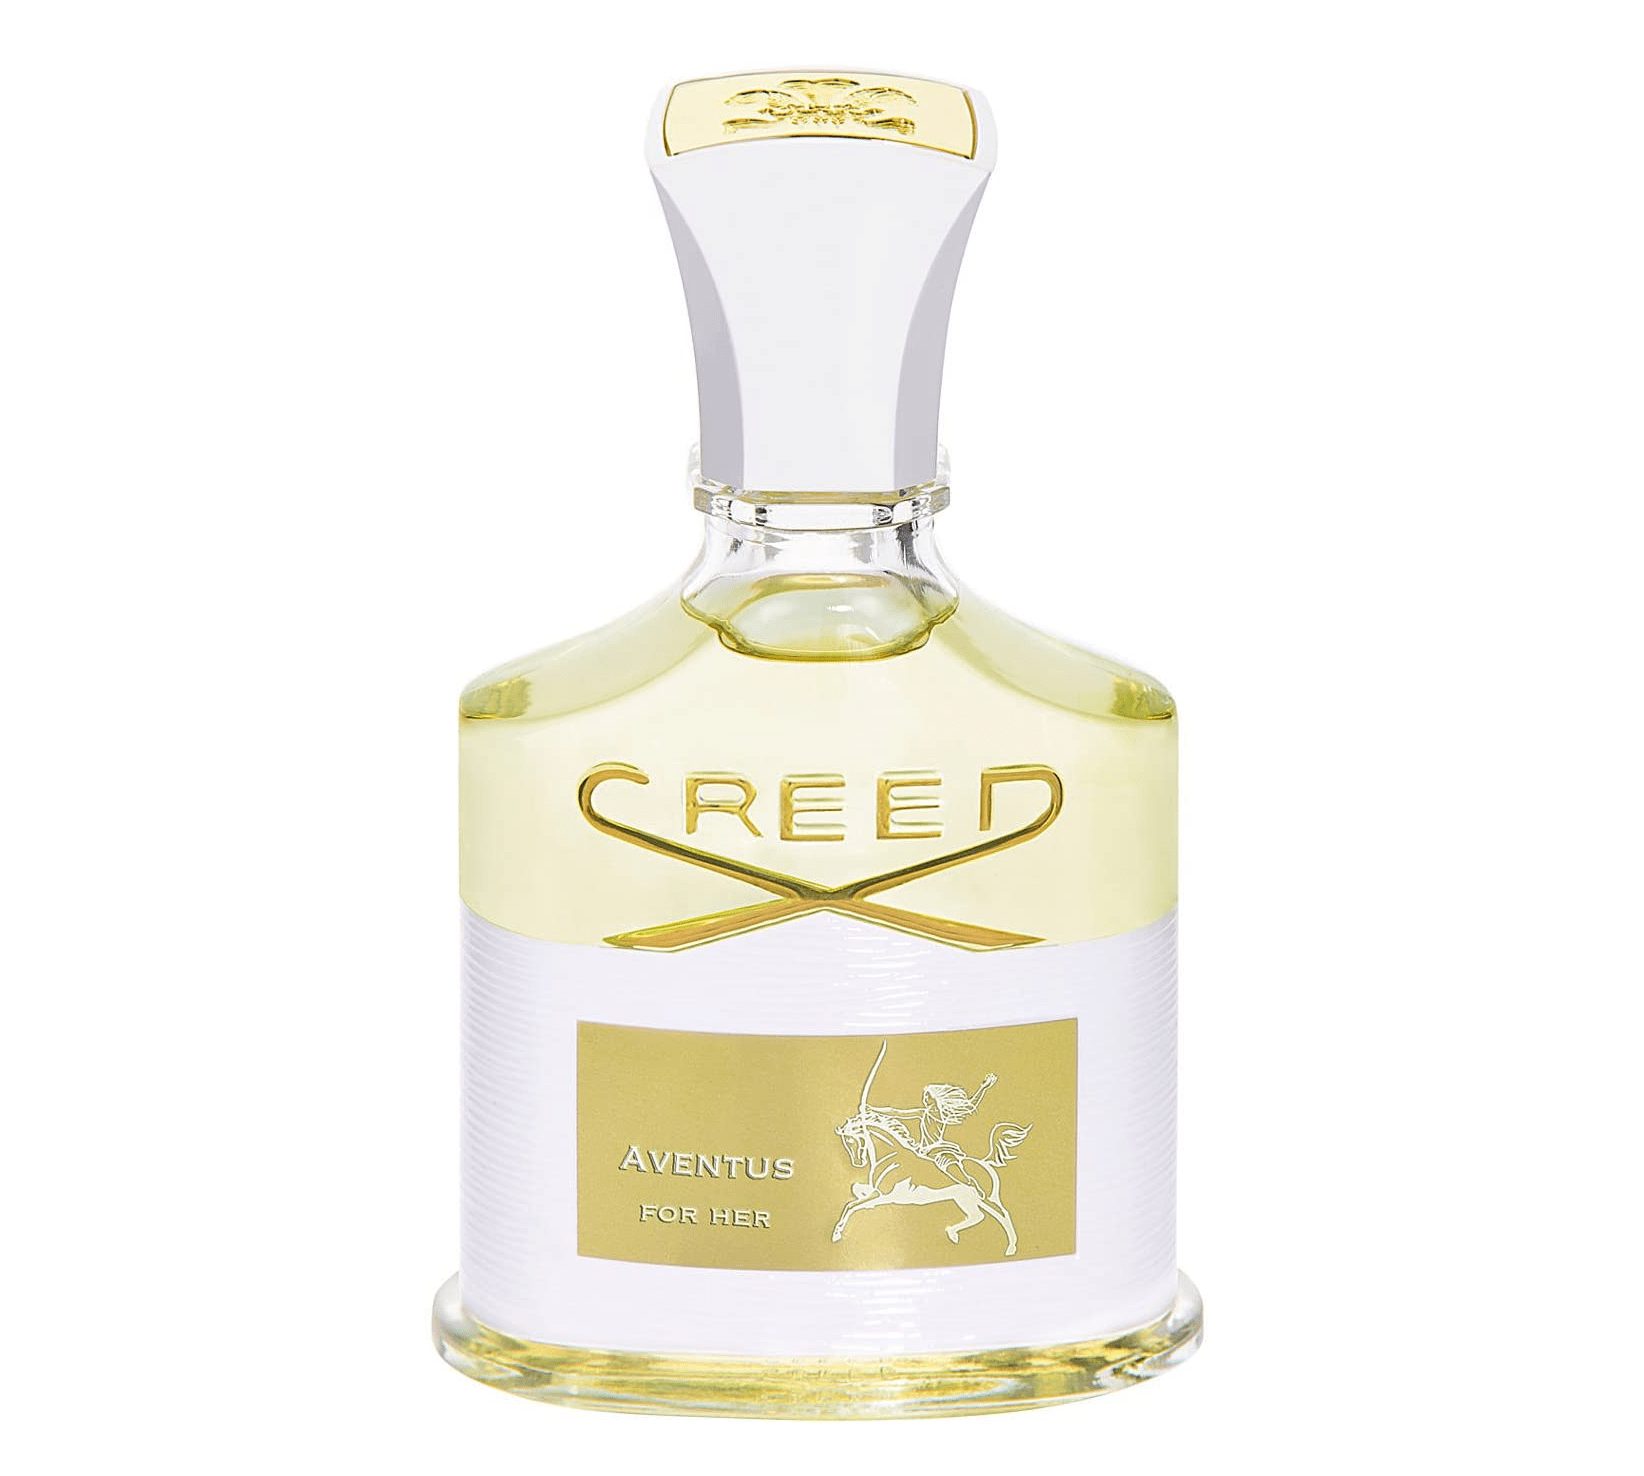 Creed – Aventus for herクリード–アバントゥス フォーハー-